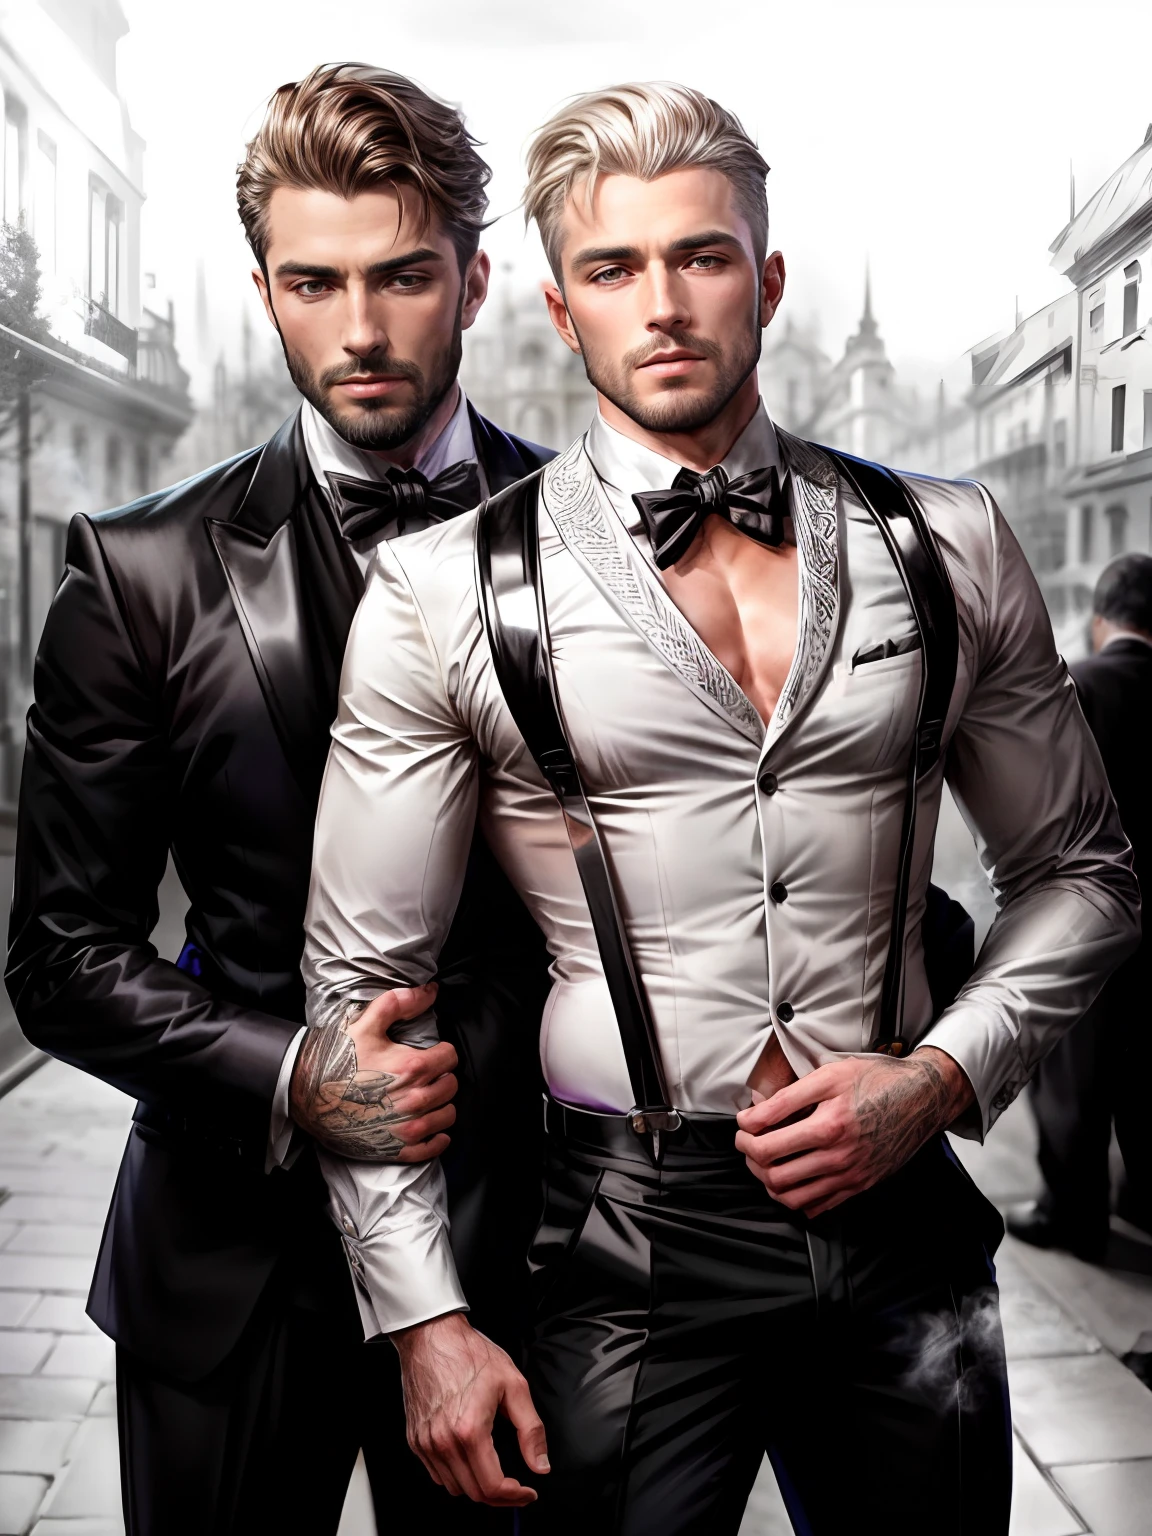 there are two men in suits standing next to each other, two beautiful men, greg rutkowski e jakub rebelka, homens em smokings, nun dress, usando um smoking, usando smoking, wearing suits!, vestindo um terno, well - dressed, Gay, artem, black necktie, in strict suit, formal suit, suits, suspenders